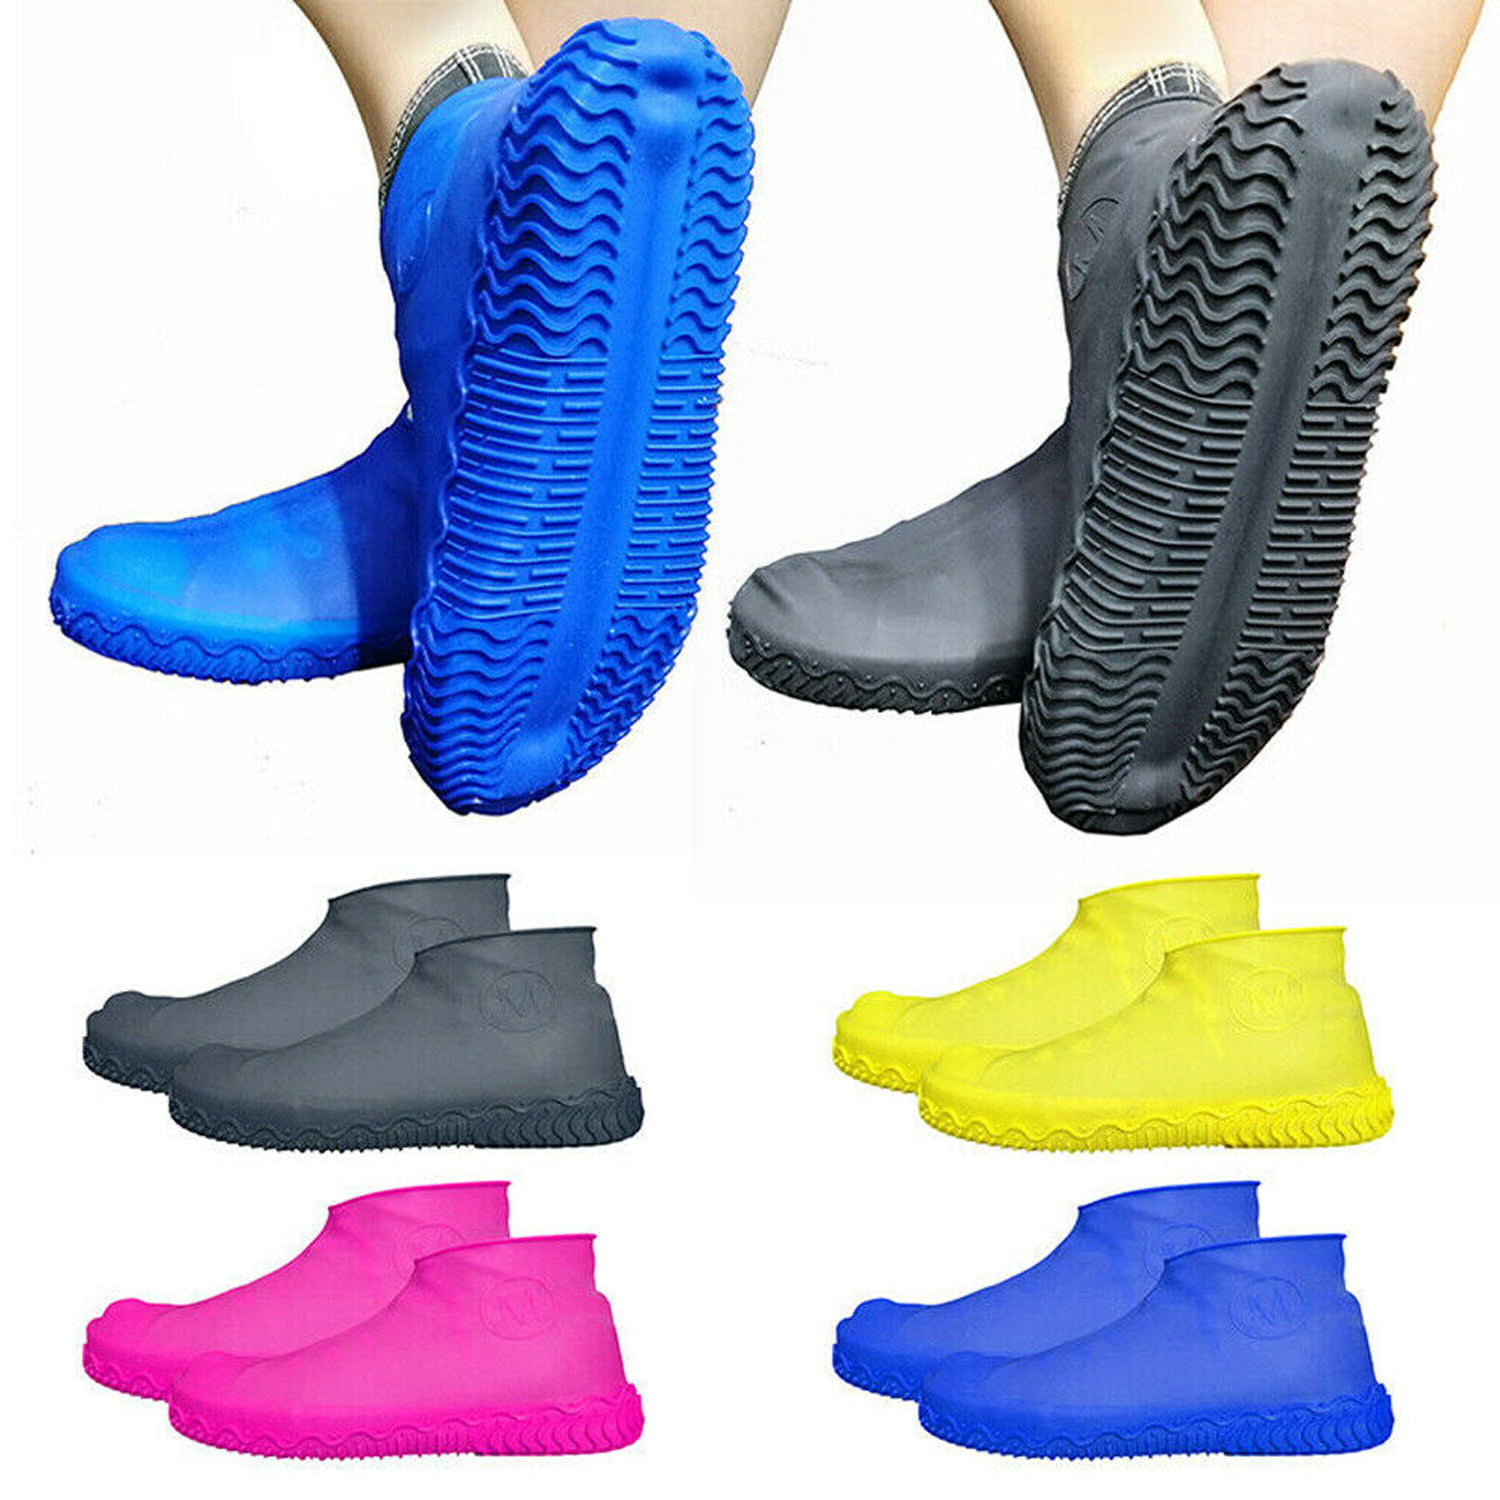 Reusable Latex Waterproof Shoes Covers Slip-resistant Solid Rubber Rain Boots 